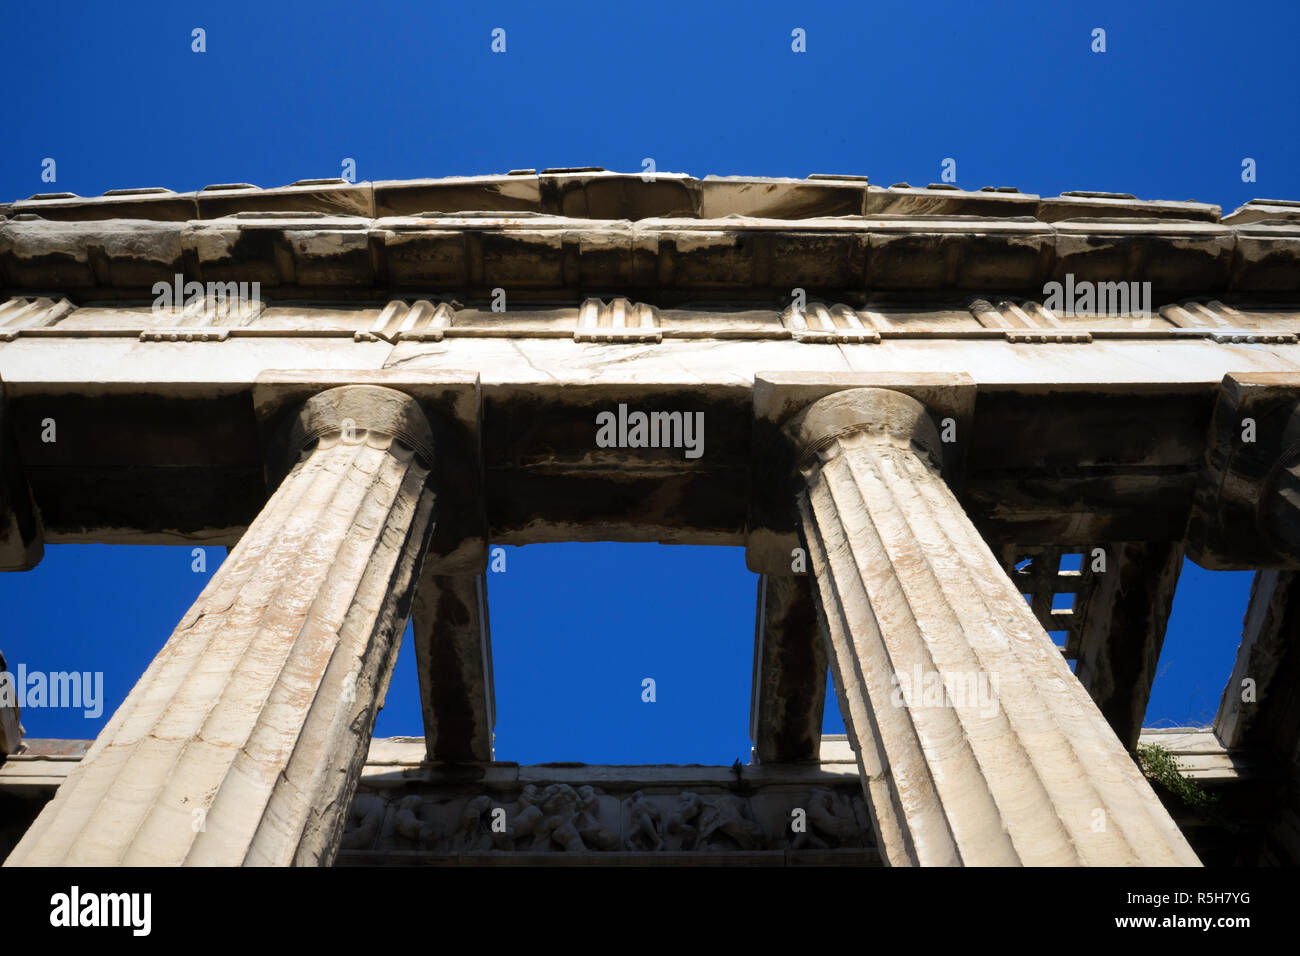 Ancient Greece.The Temple of Hephaestus in Athens Stock Photo